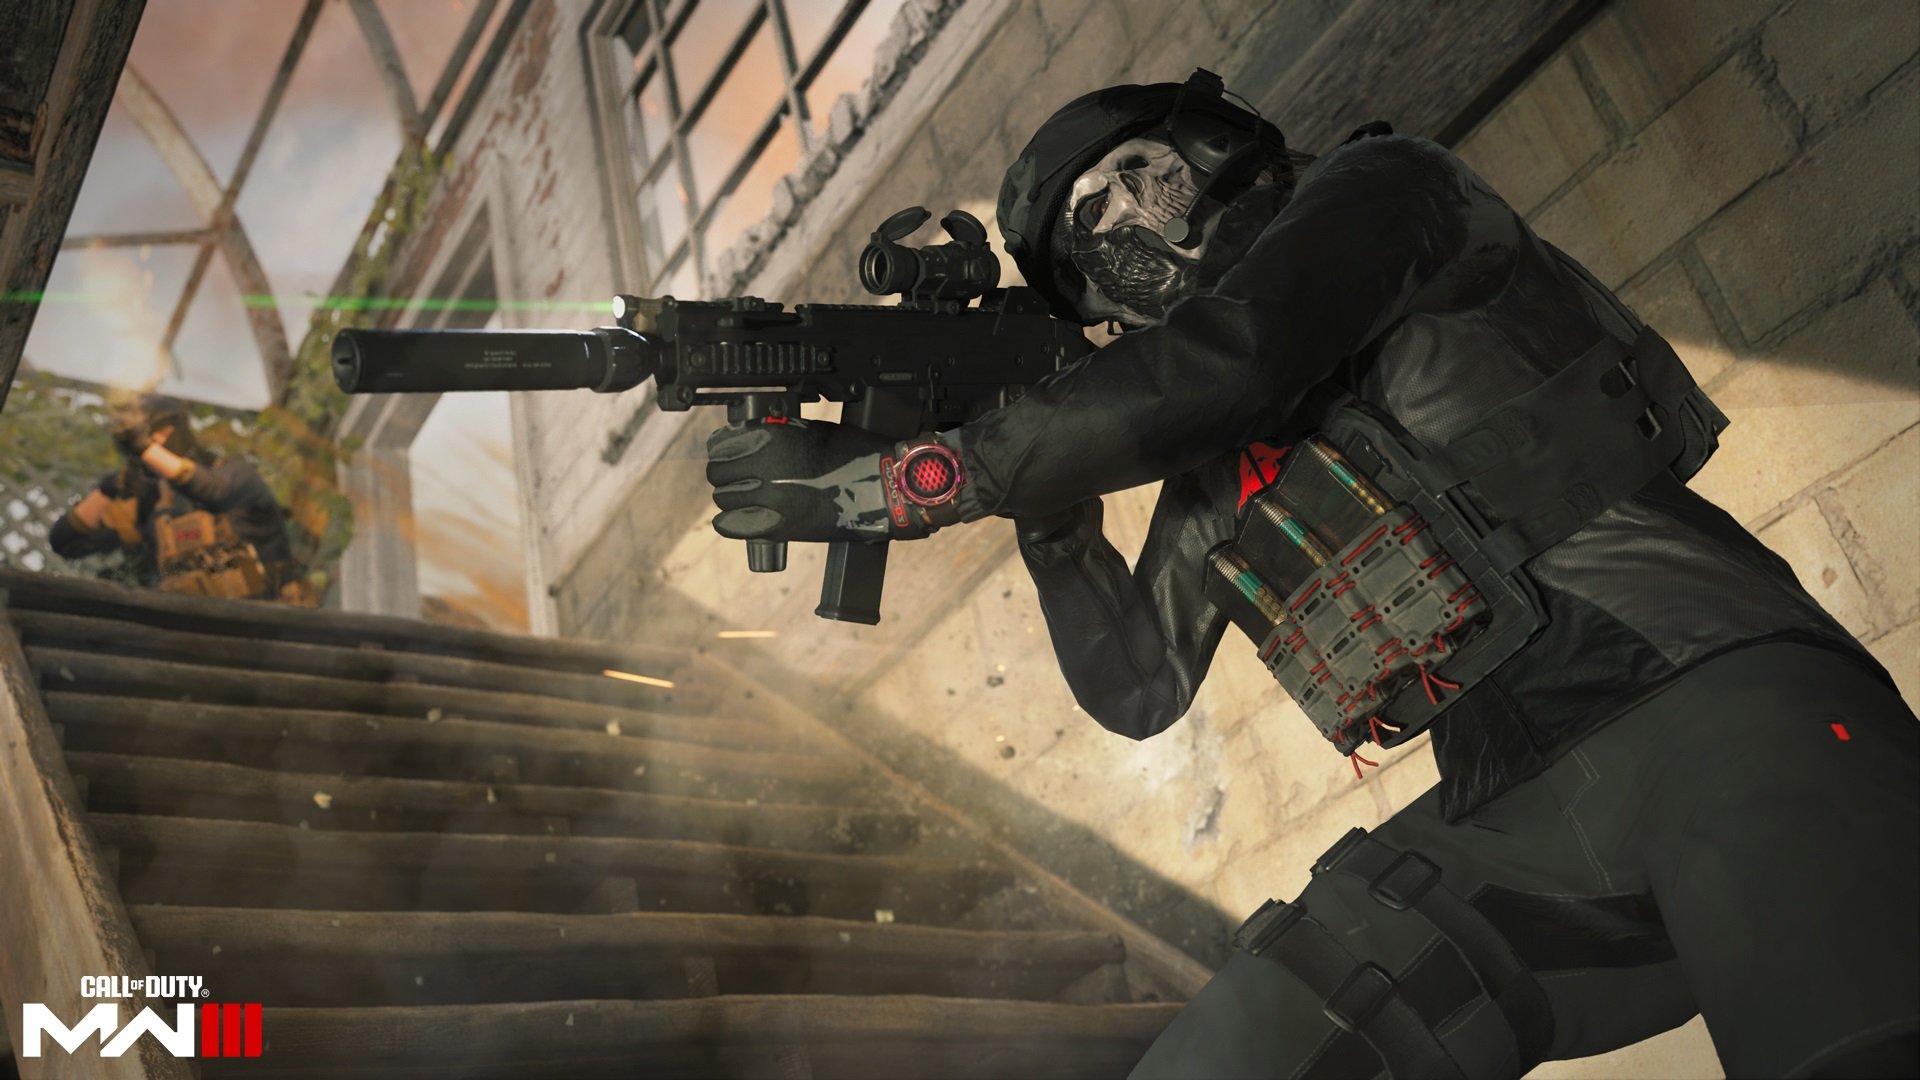 Call Of Duty Modern Warfare III review: a low point in the series